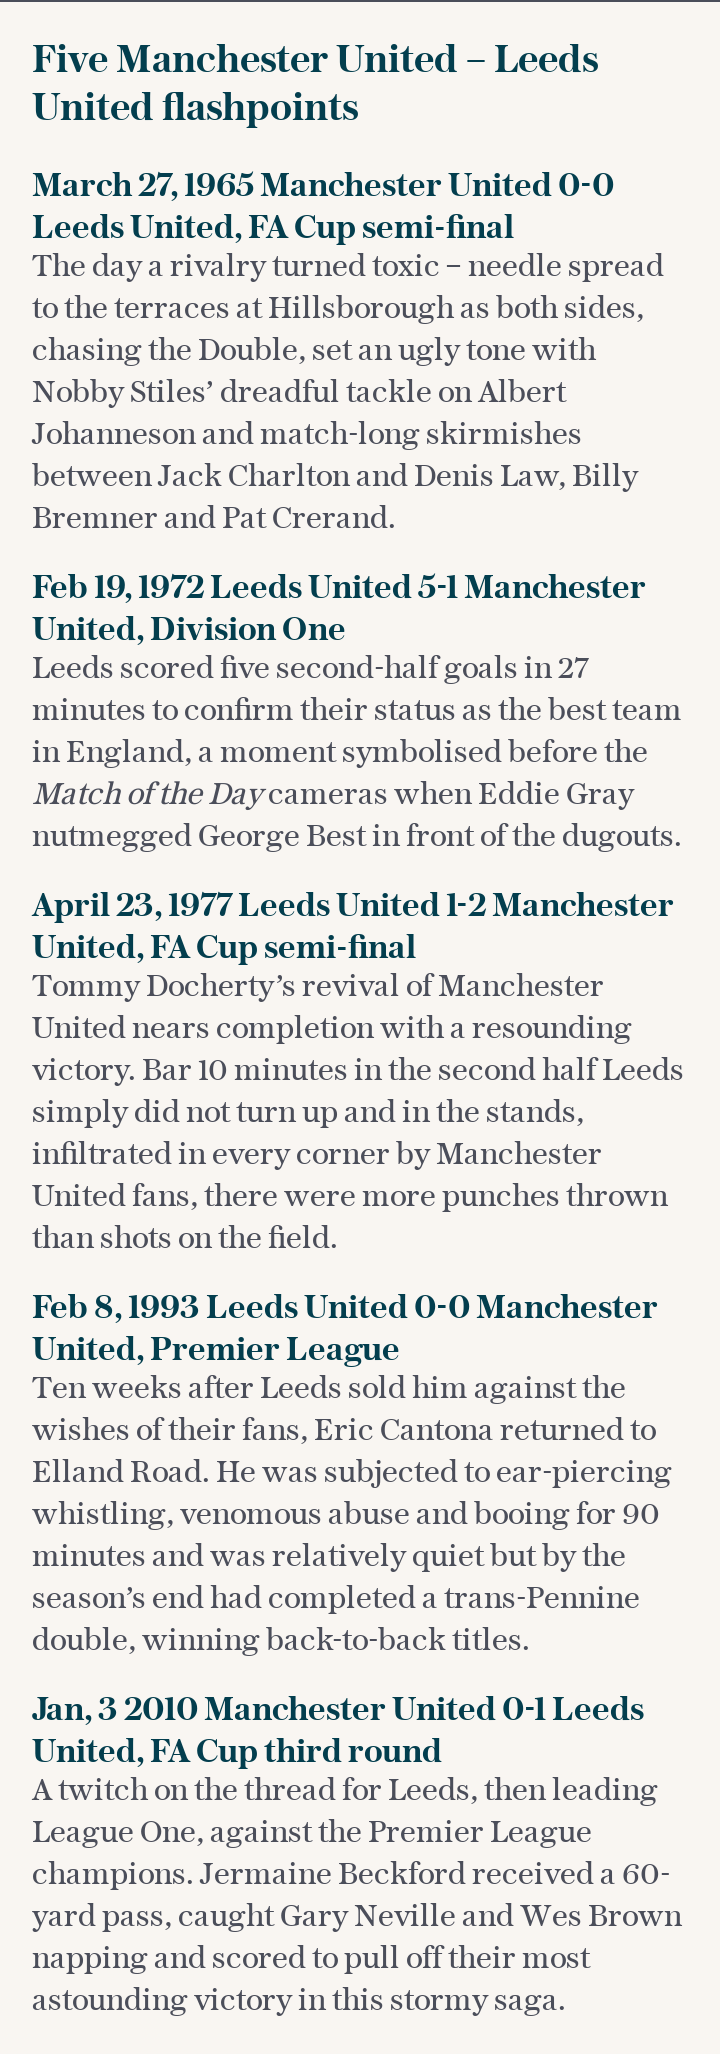 Five Manchester United – Leeds United flashpoints